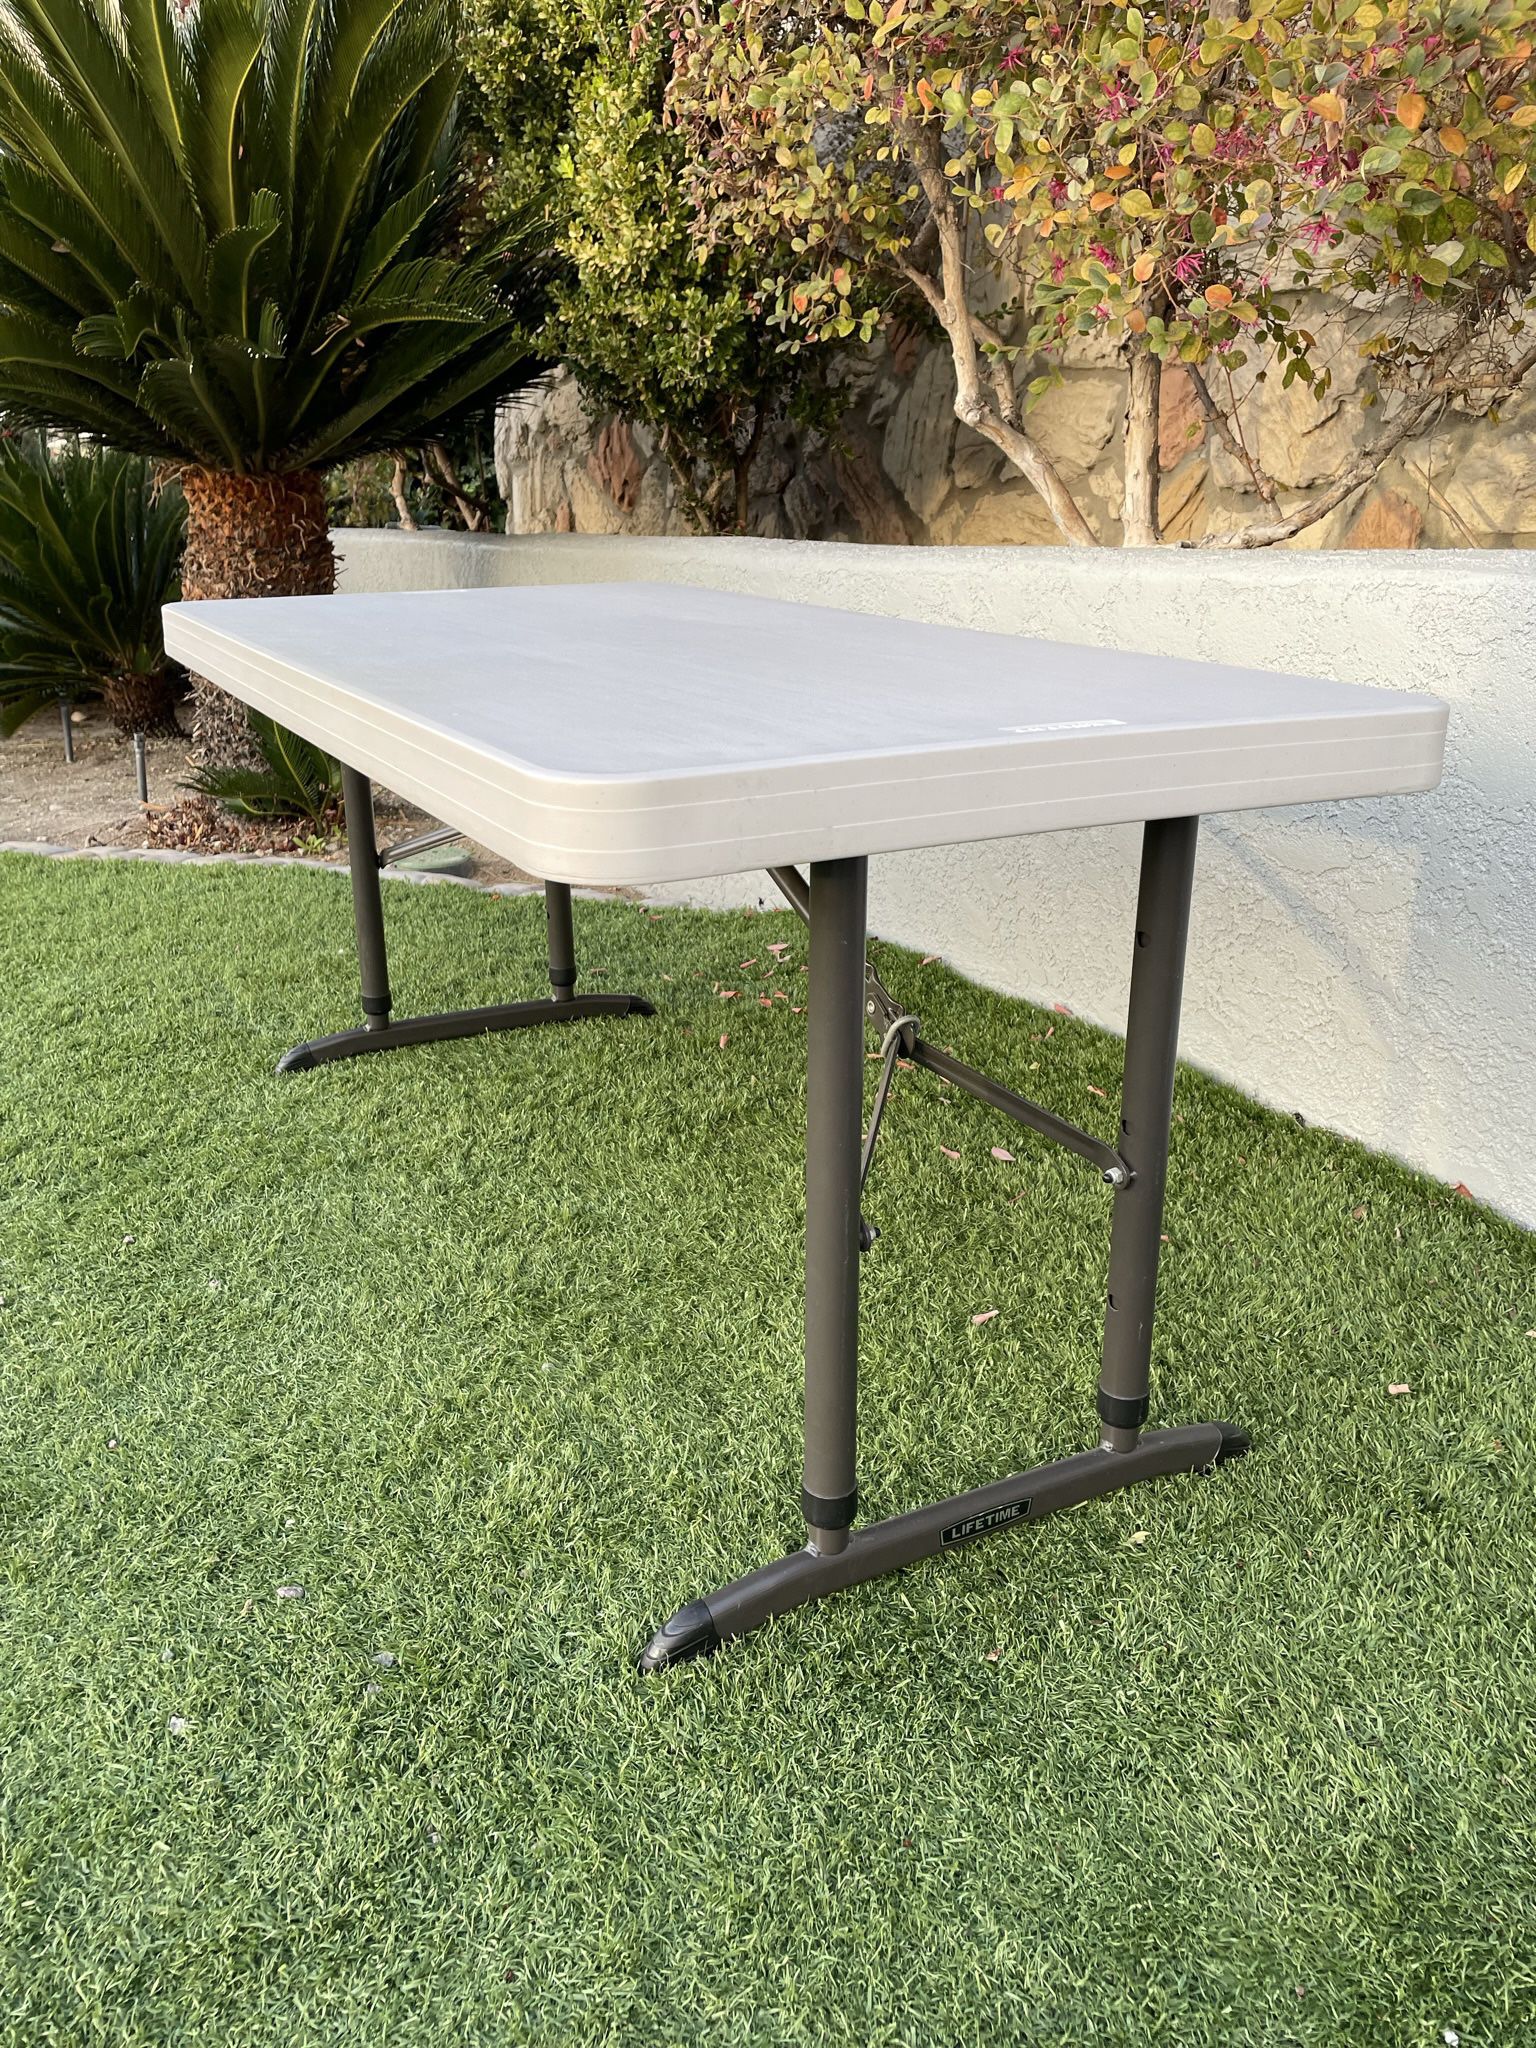 58 x 36 Height Adjustable Foldable Craft Table with Wheels for Sale in City  Of Industry, CA - OfferUp